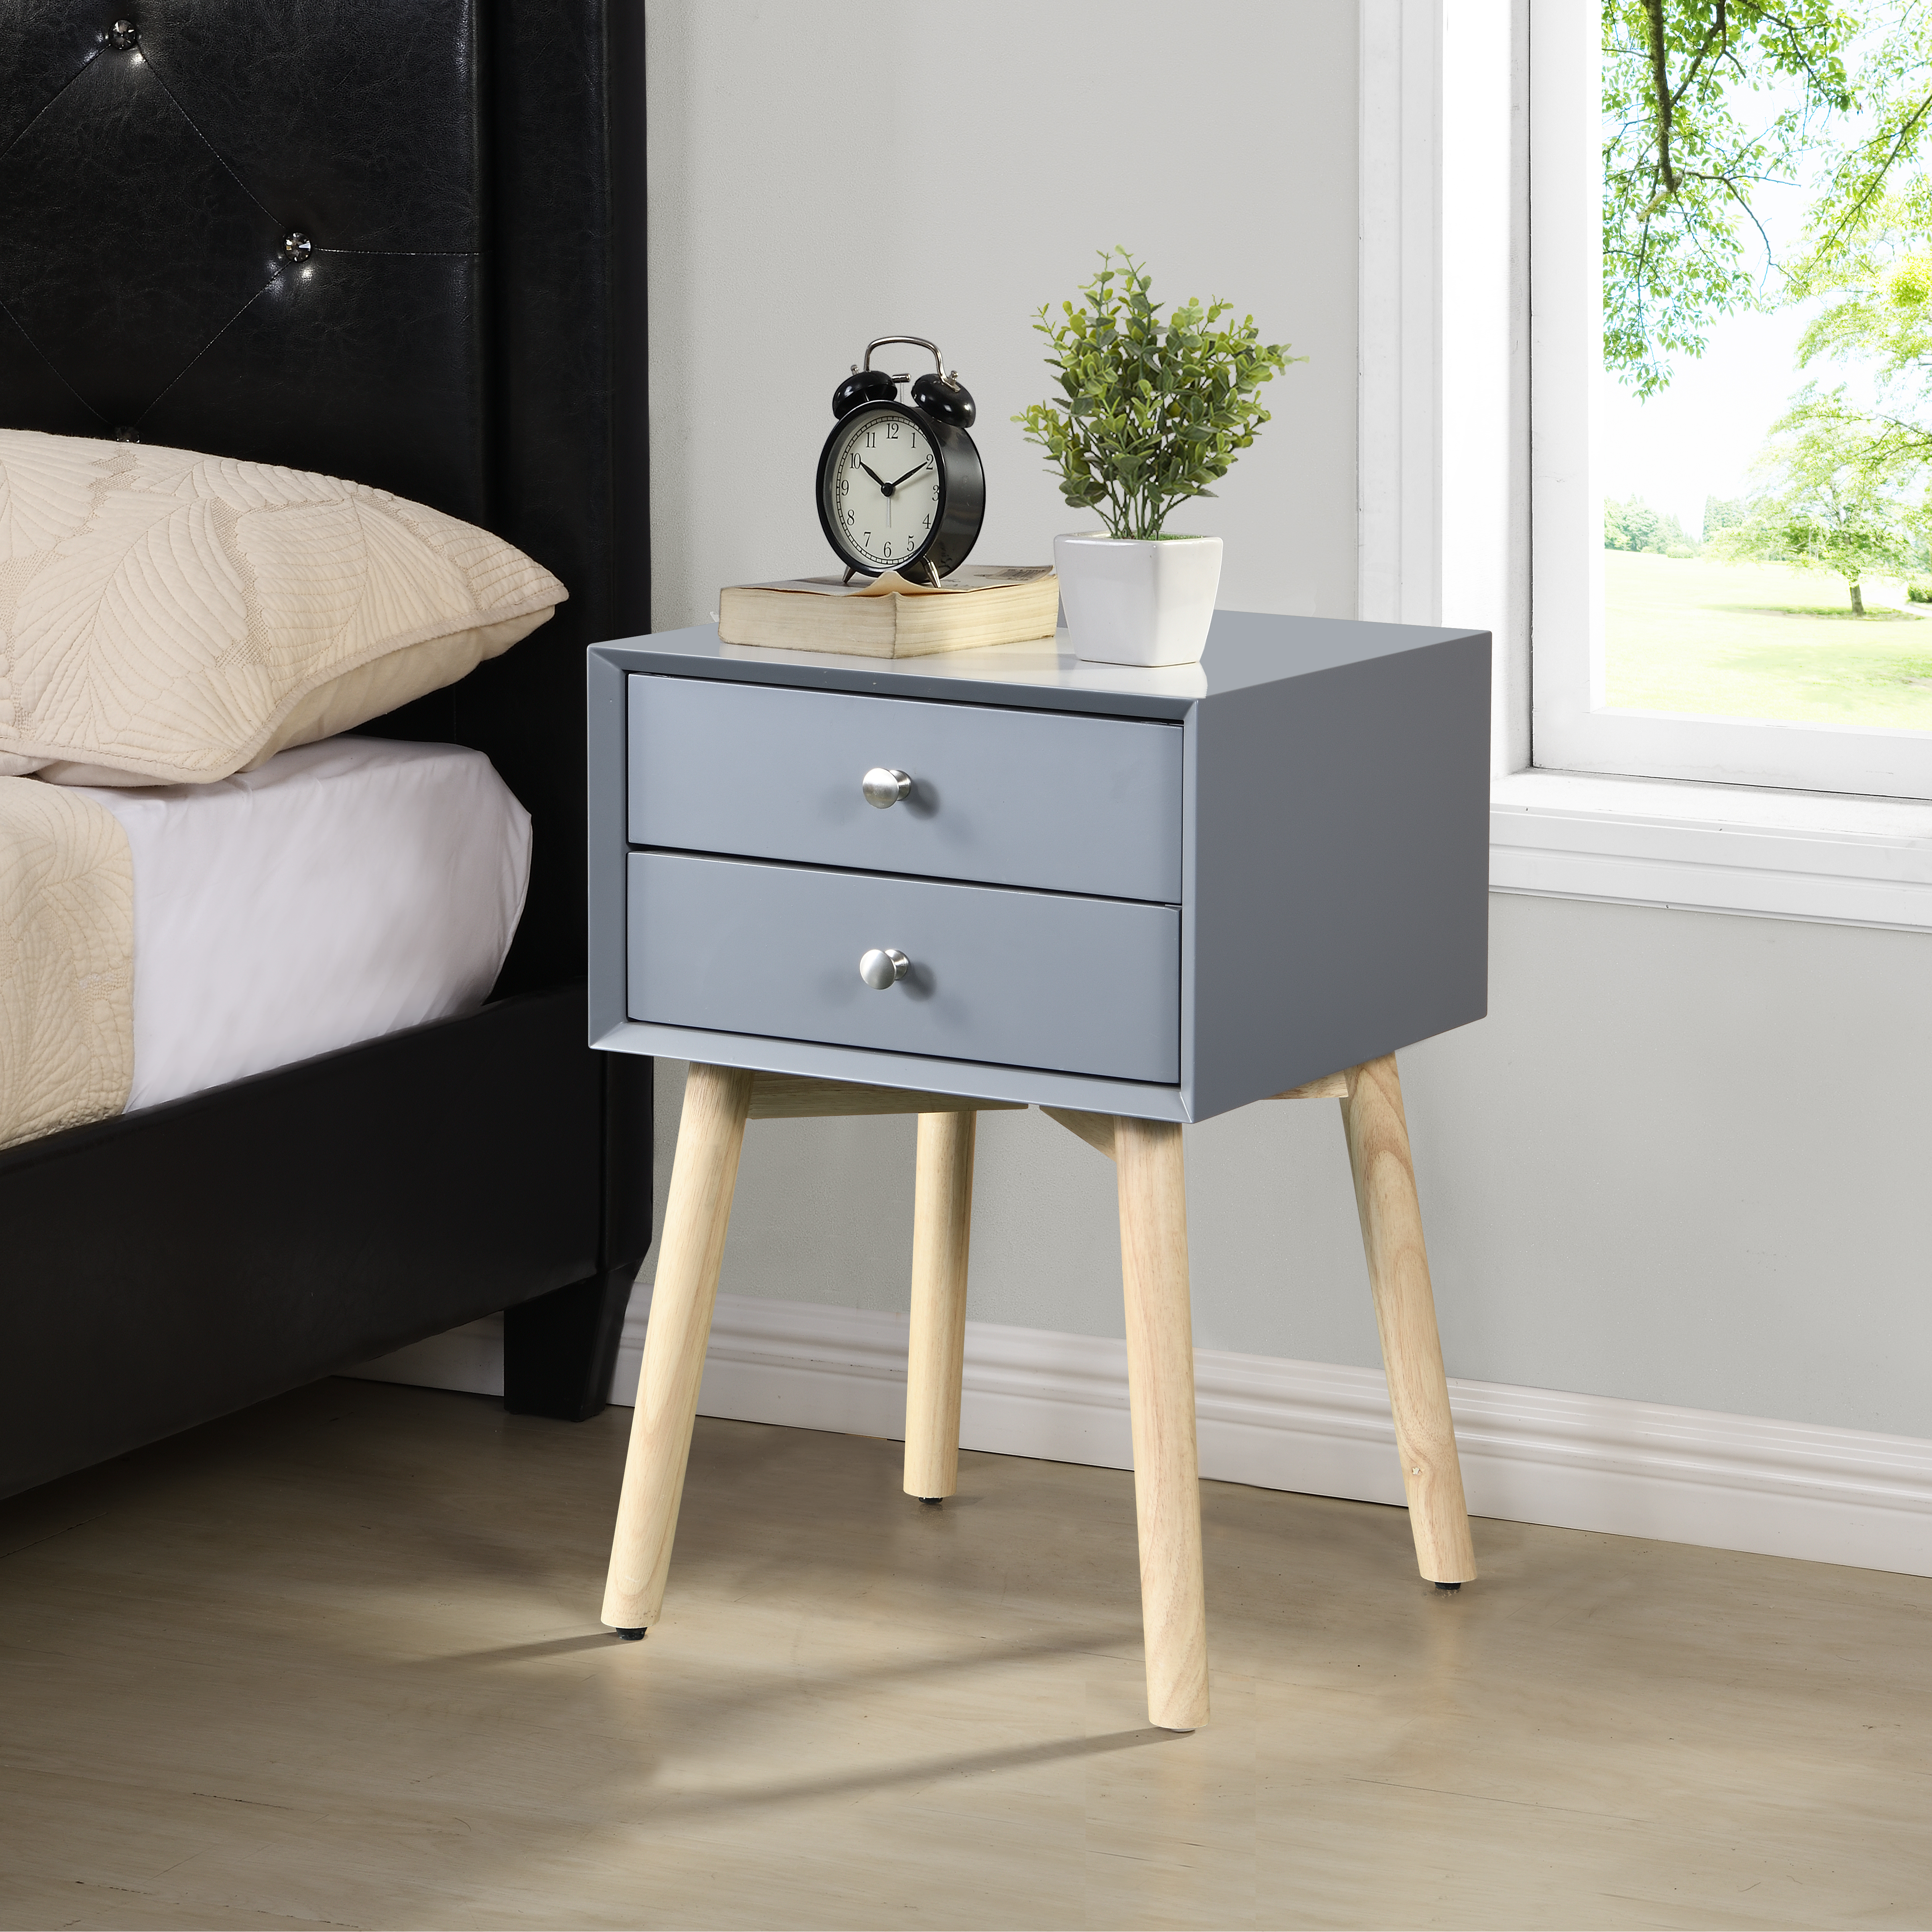 Side Table with 2 Drawer and Rubber Wood Legs, Mid-Century Modern Storage Cabinet for Bedroom Living Room Furniture, Gray-Boyel Living